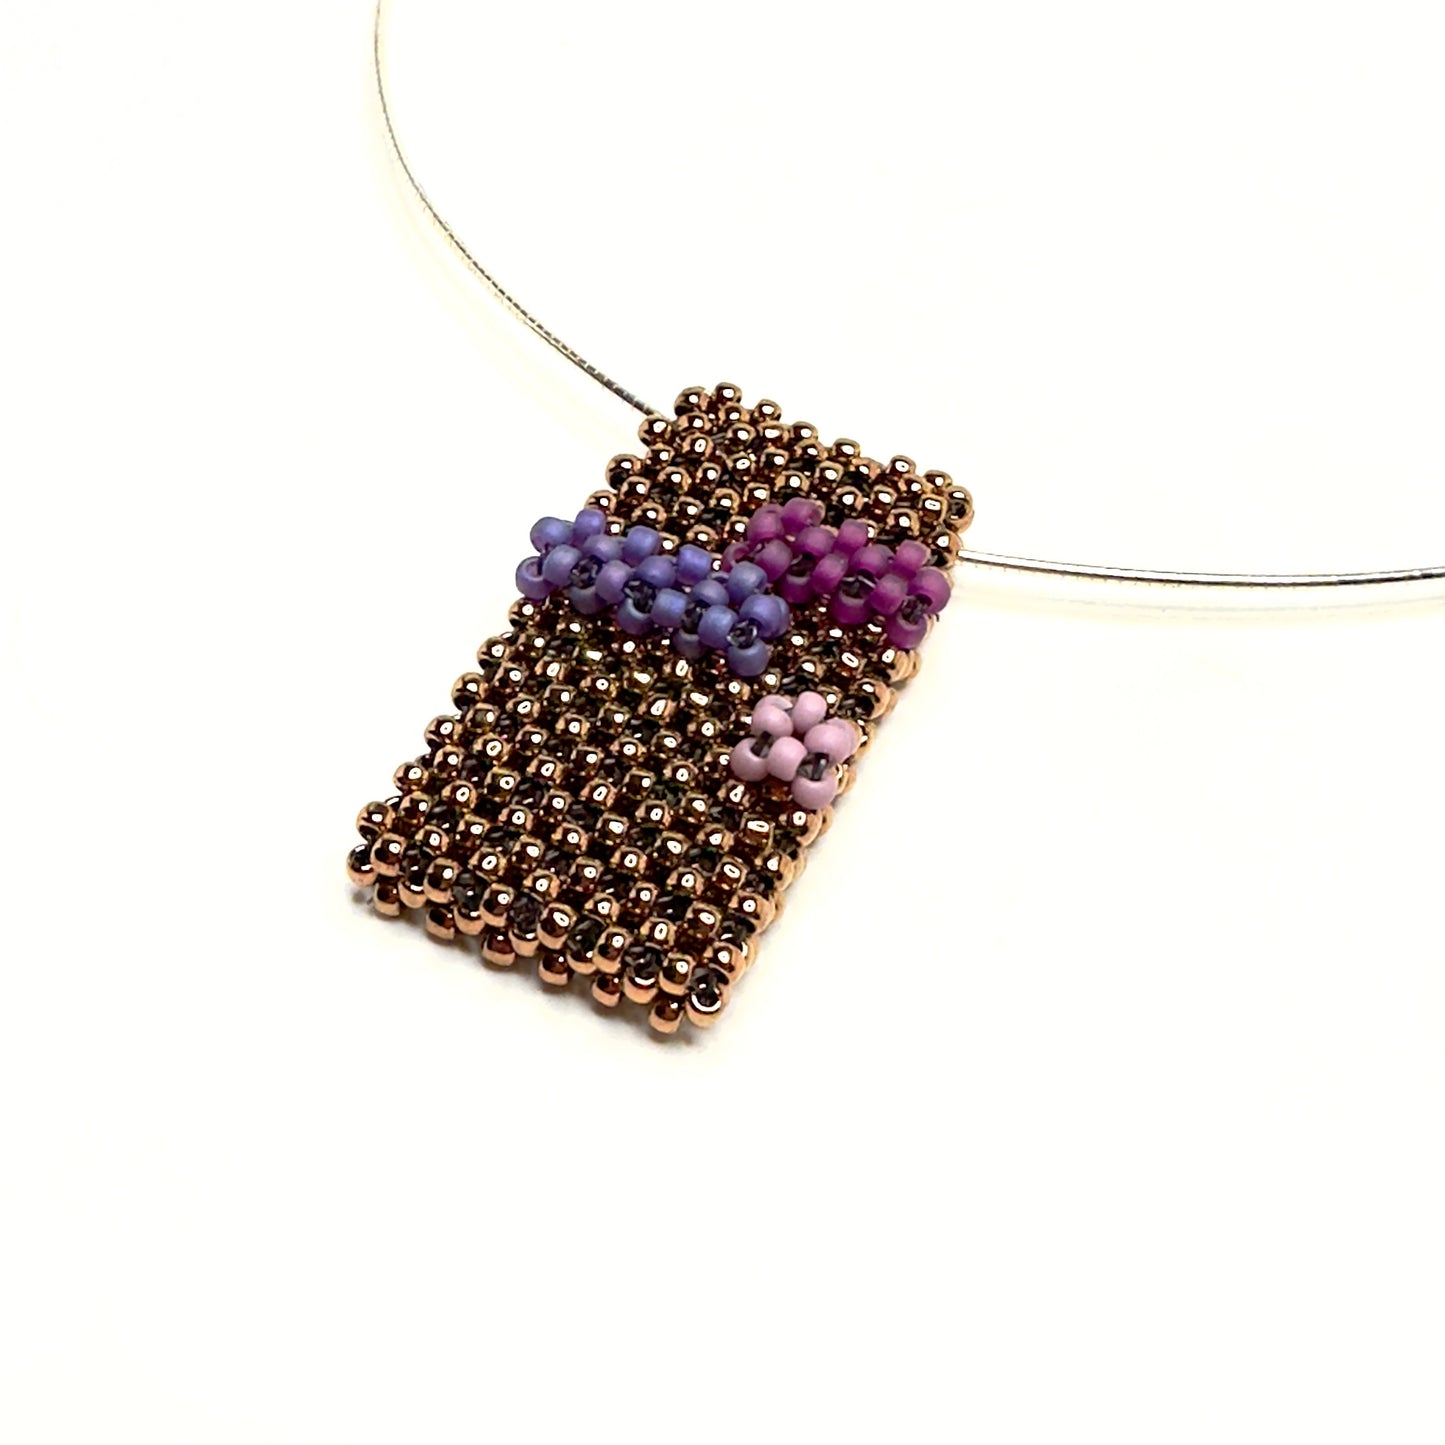 Abstract Handwoven Pendant